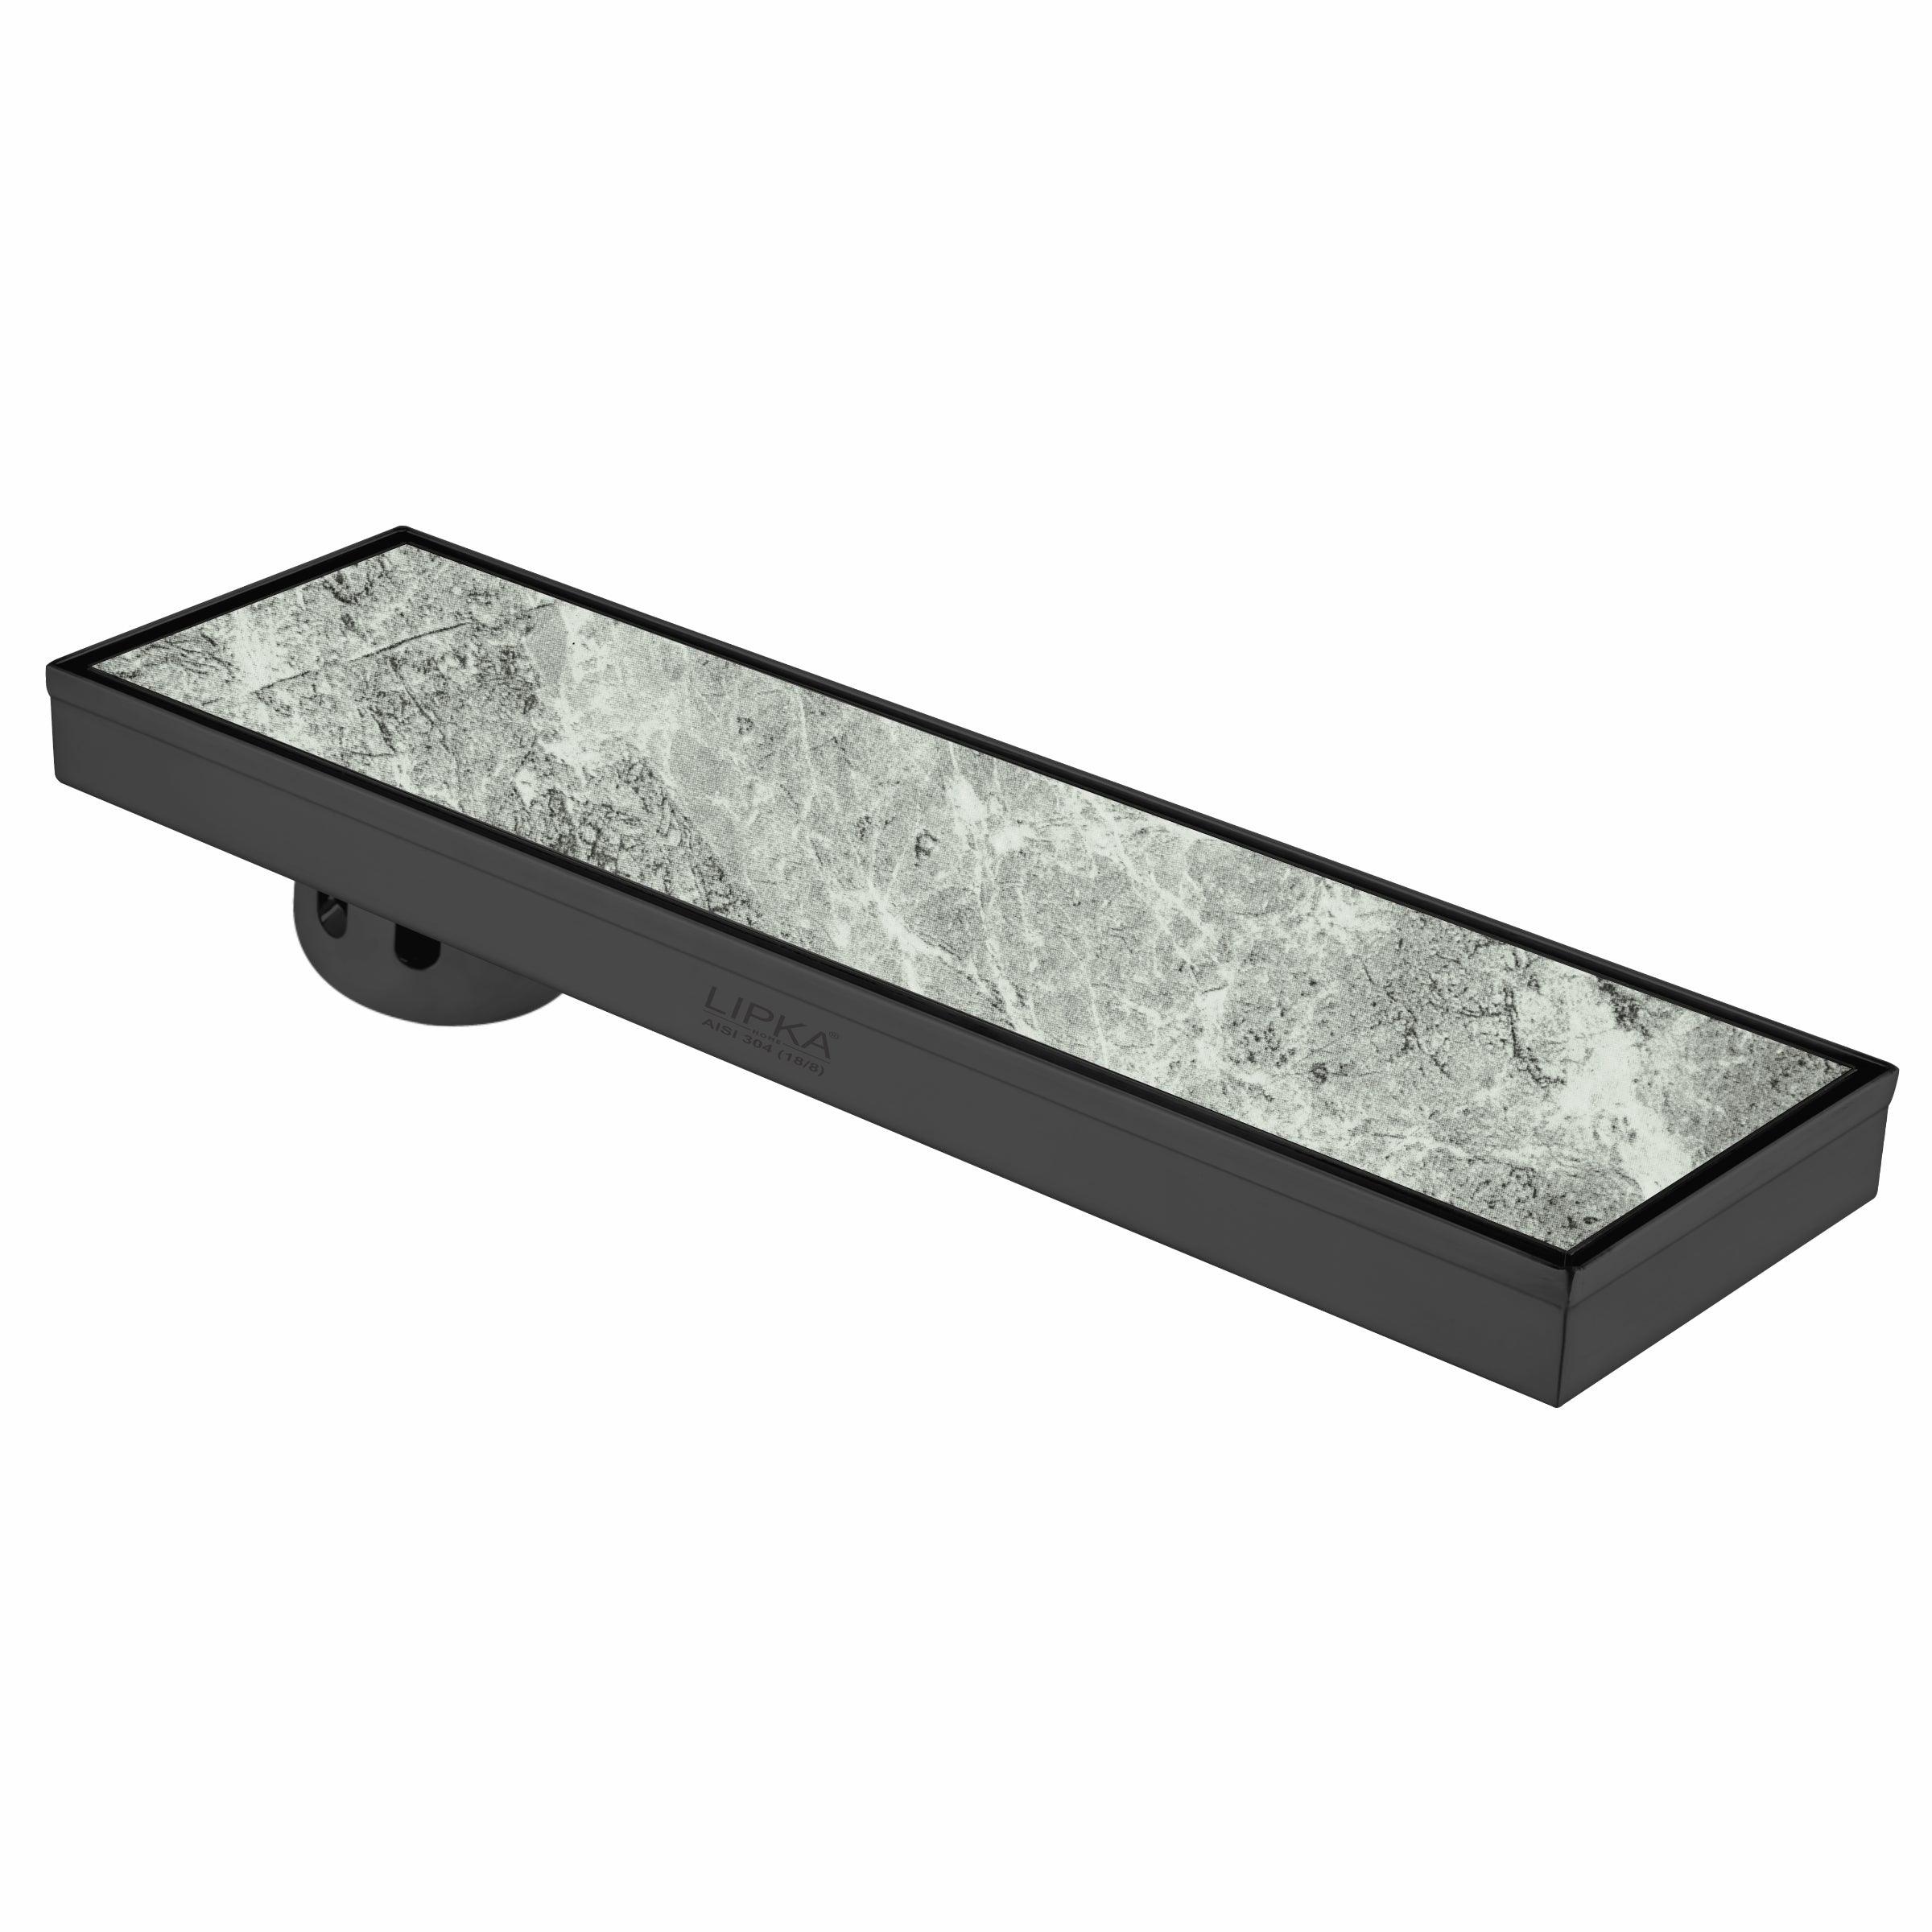 Tile Insert Shower Drain Channel - Black (24 x 5 Inches)